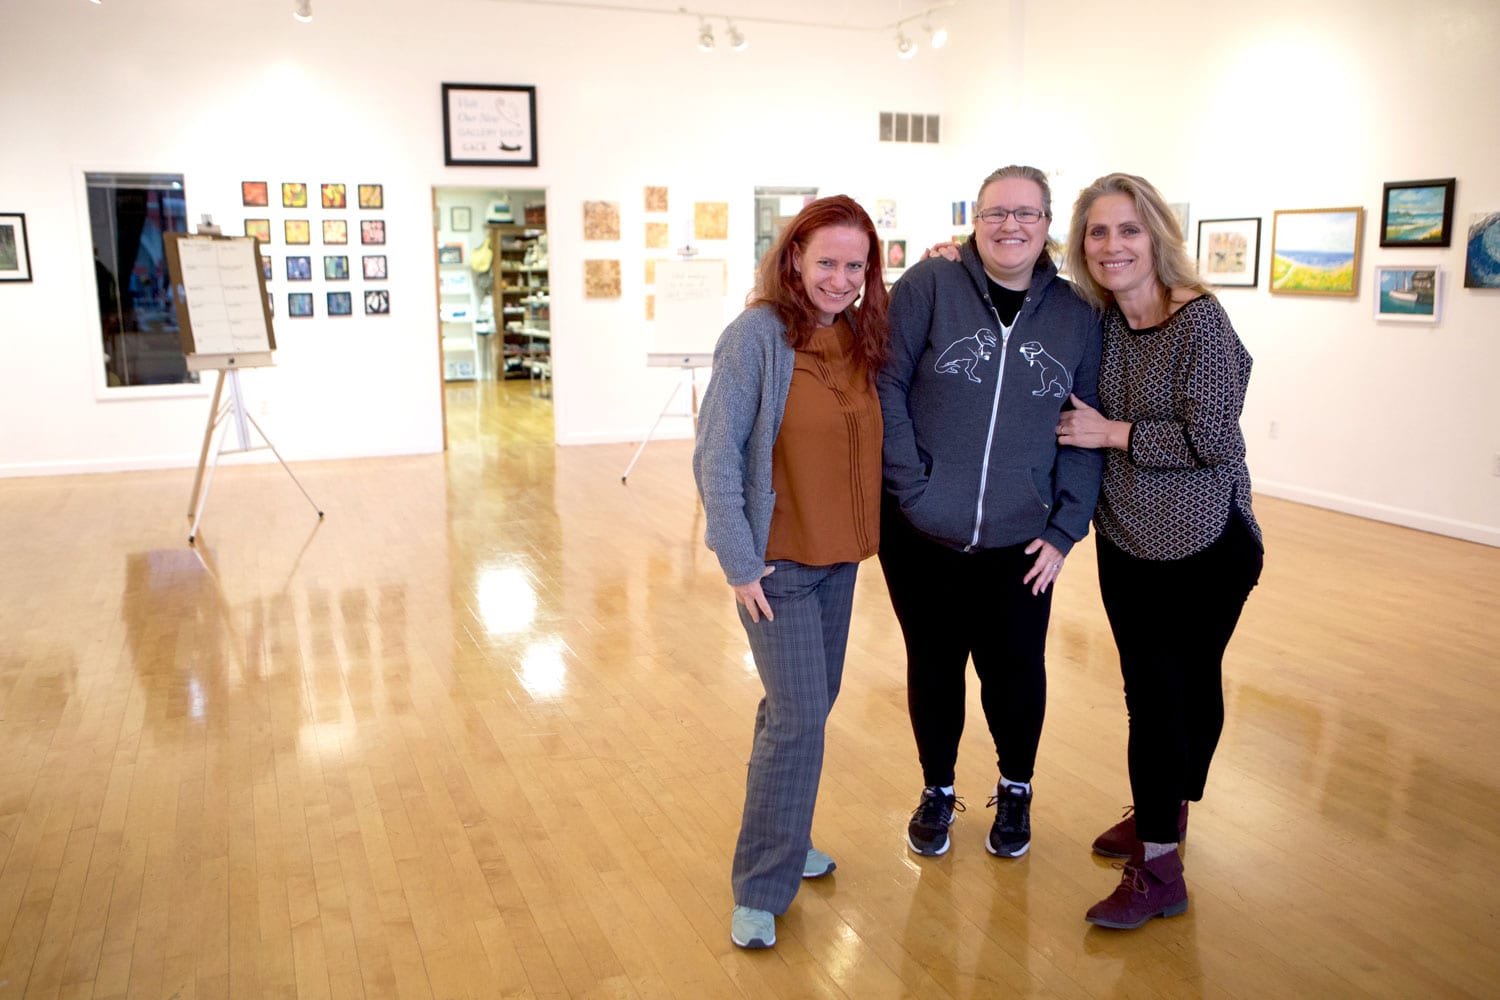 three people standing in an art gallery posing for a picture.